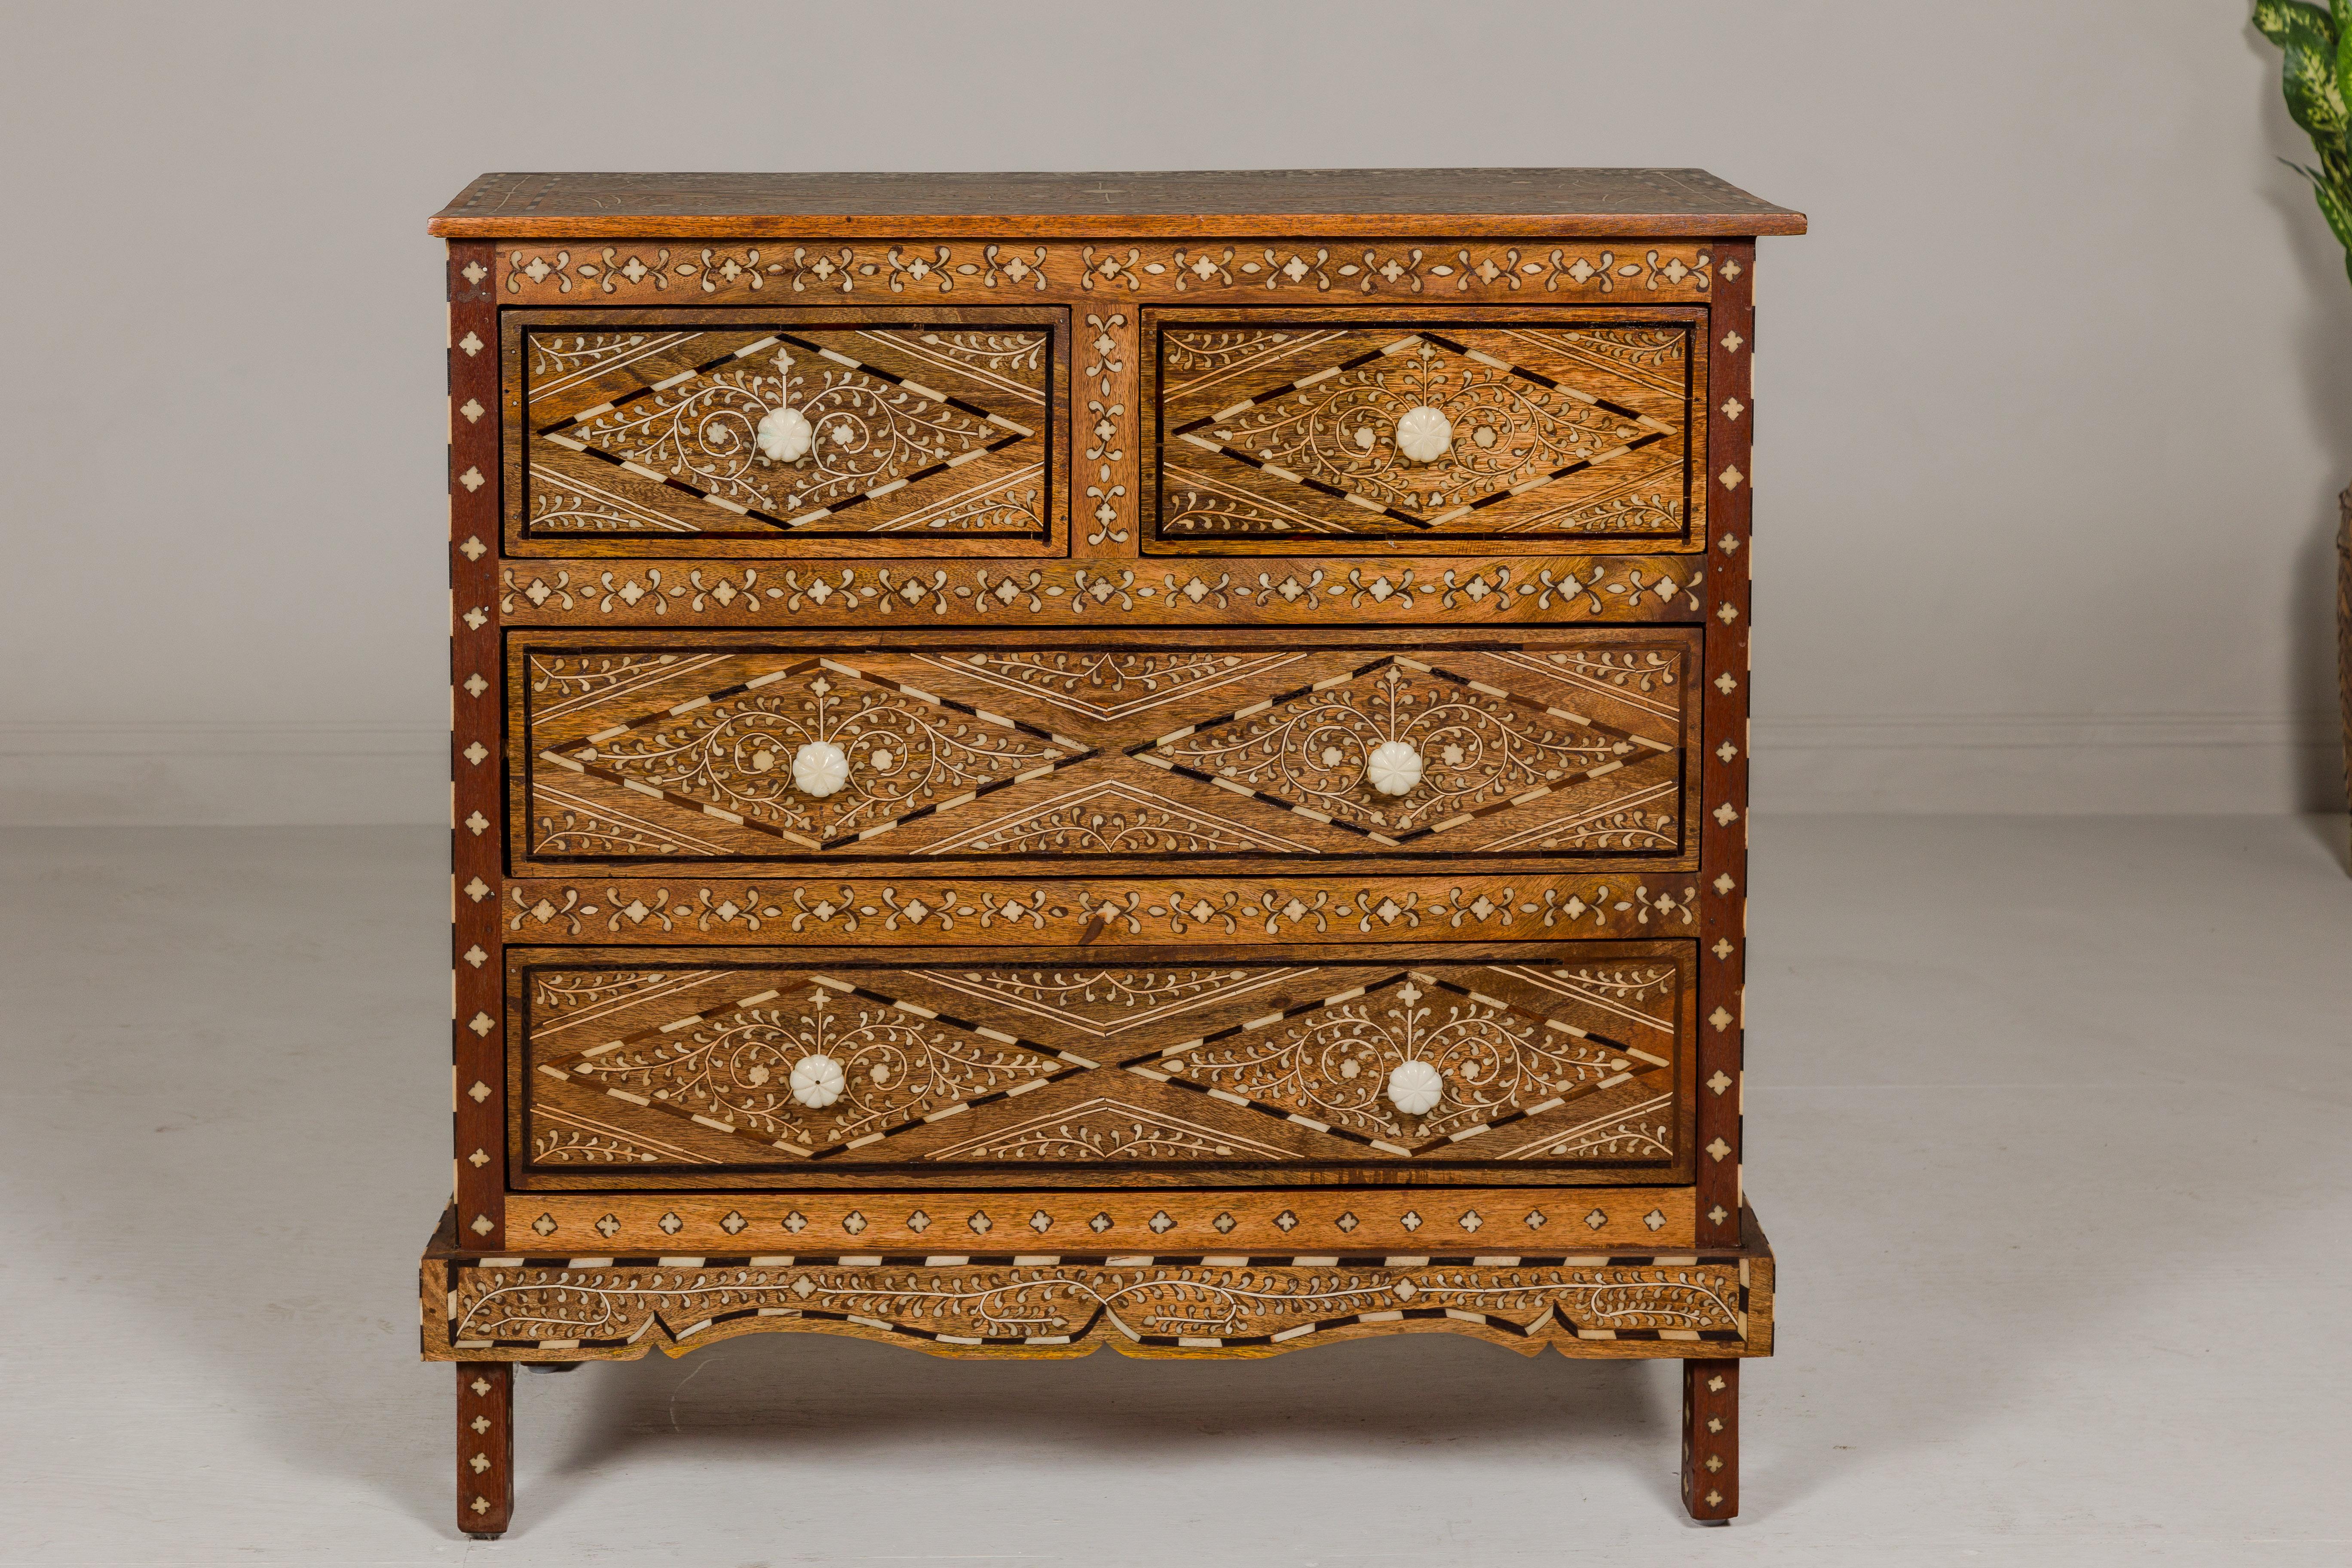 Carved Anglo-Indian Style Mango Wood Four-Drawer Chest with Foliage Bone Inlay For Sale